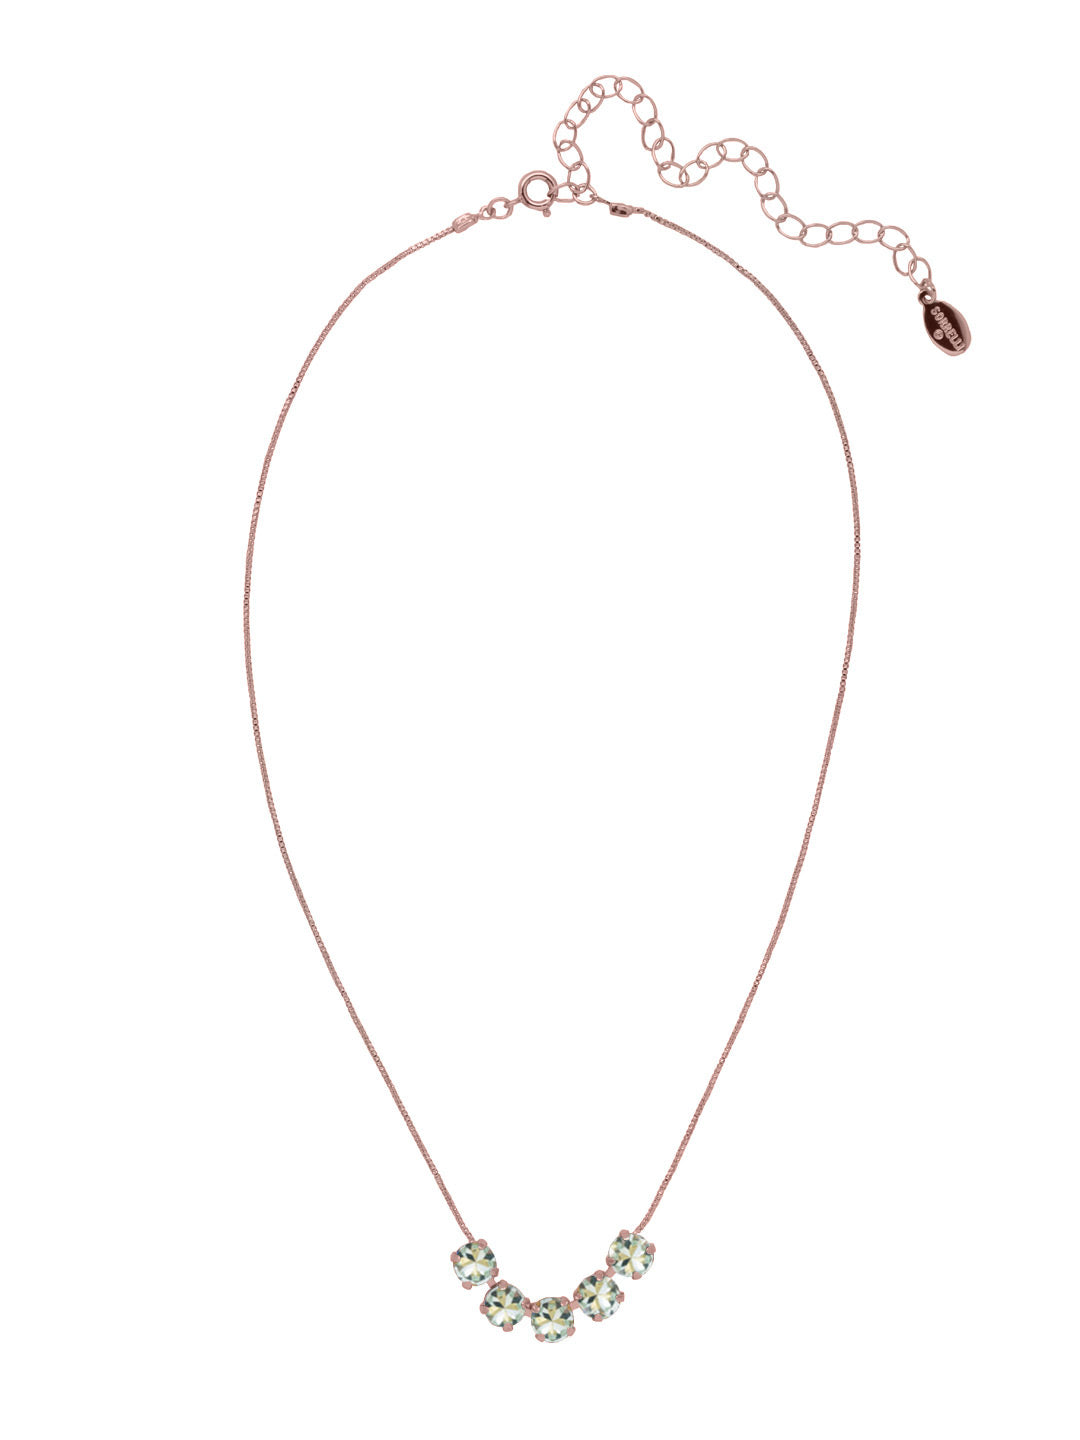 Shaughna Tennis Necklace - NFC84RGLAQ - <p>The Shaughna Tennis Necklace features five crystals on a delicate adjustable chain. From Sorrelli's Light Aqua collection in our Rose Gold-tone finish.</p>